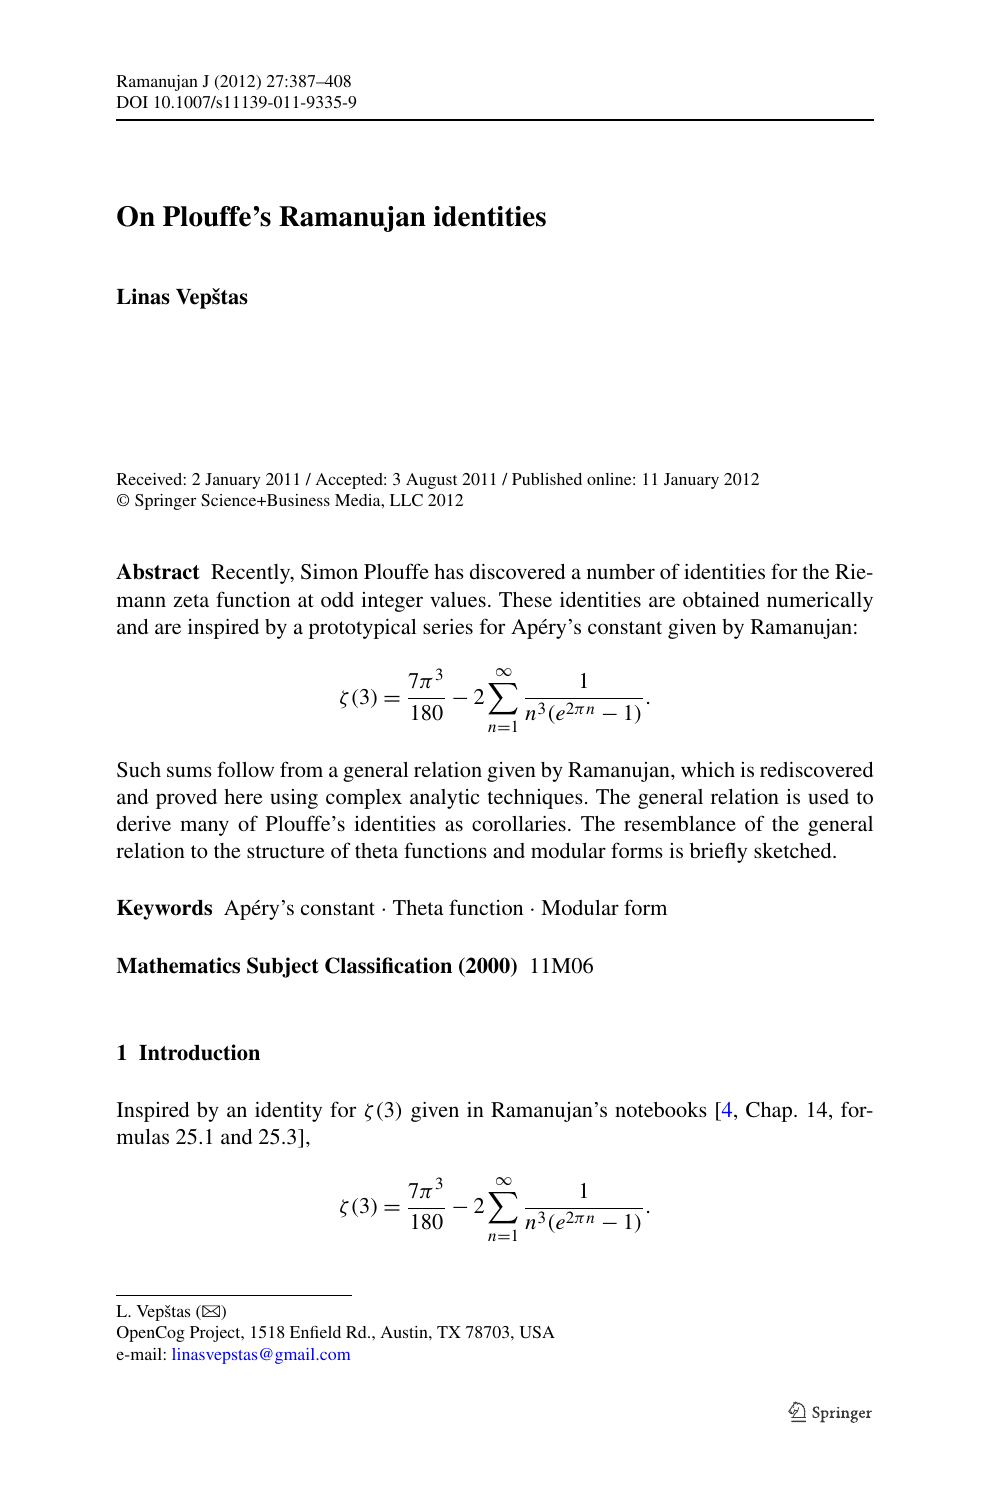 On Plouffe's Ramanujan identities – topic of research paper in